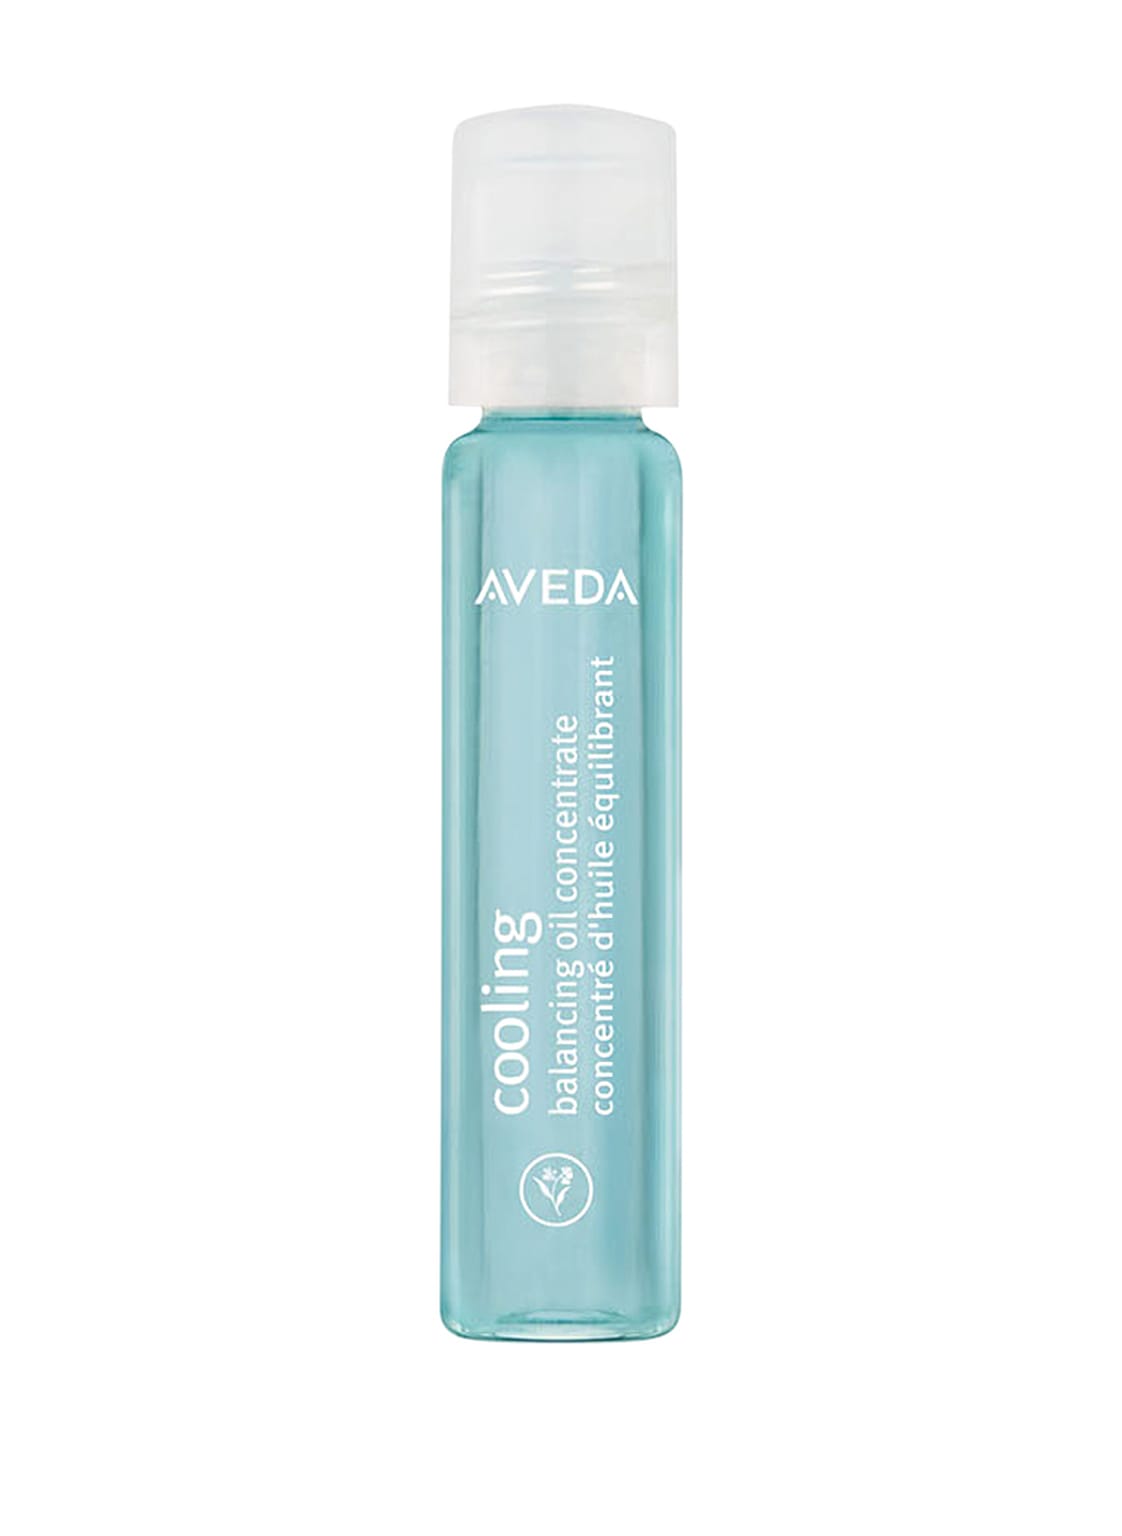 Aveda Cooling Balancing Oil Concentrate Rollerball 7 ml von AVEDA